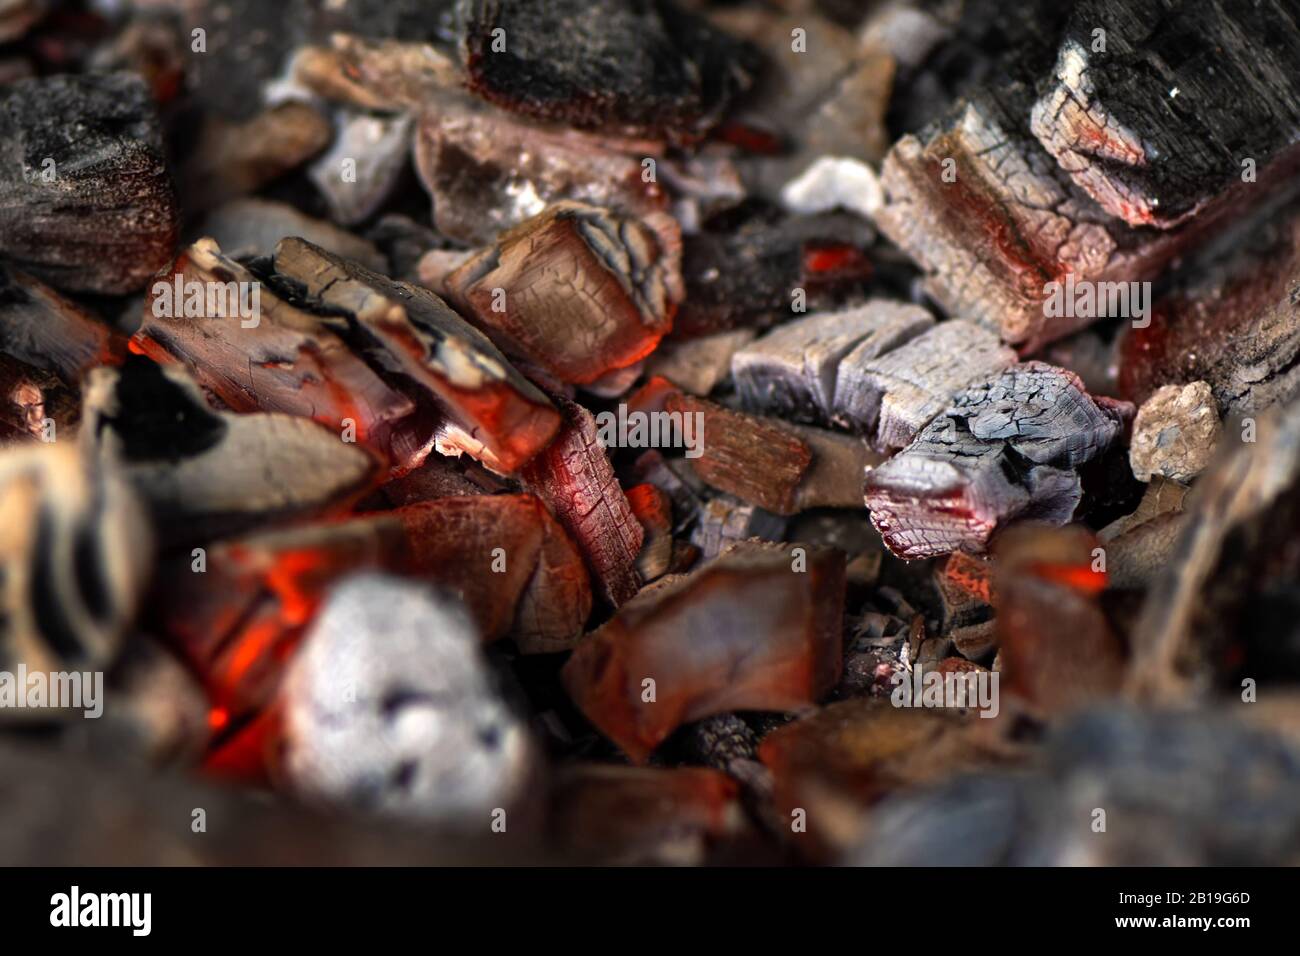 Burning coals in stove for cooking, close up Stock Photo